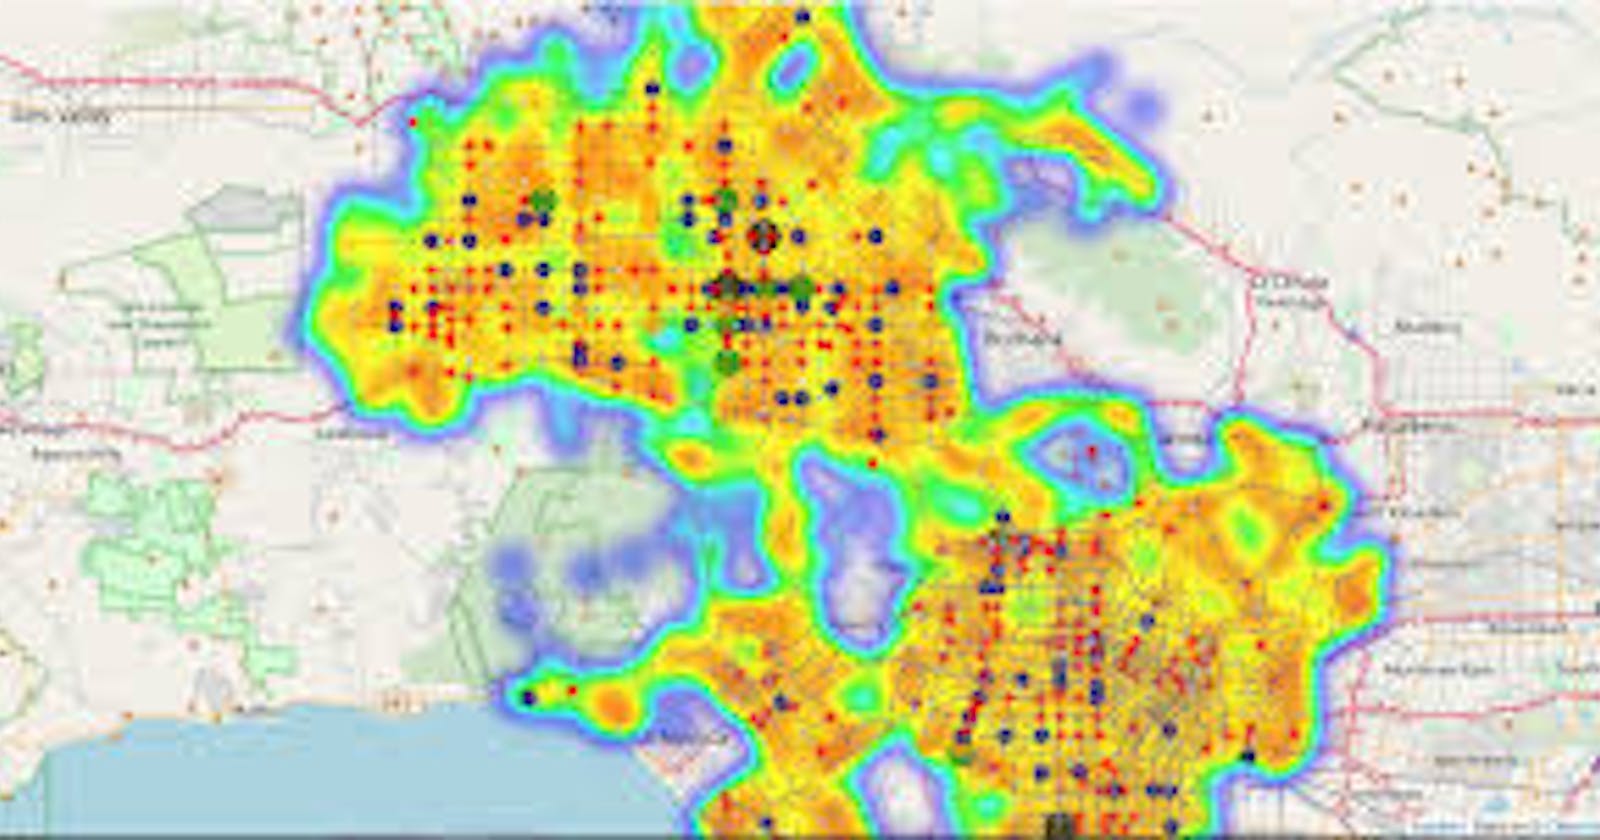 Making a Geographic Heatmap with Python